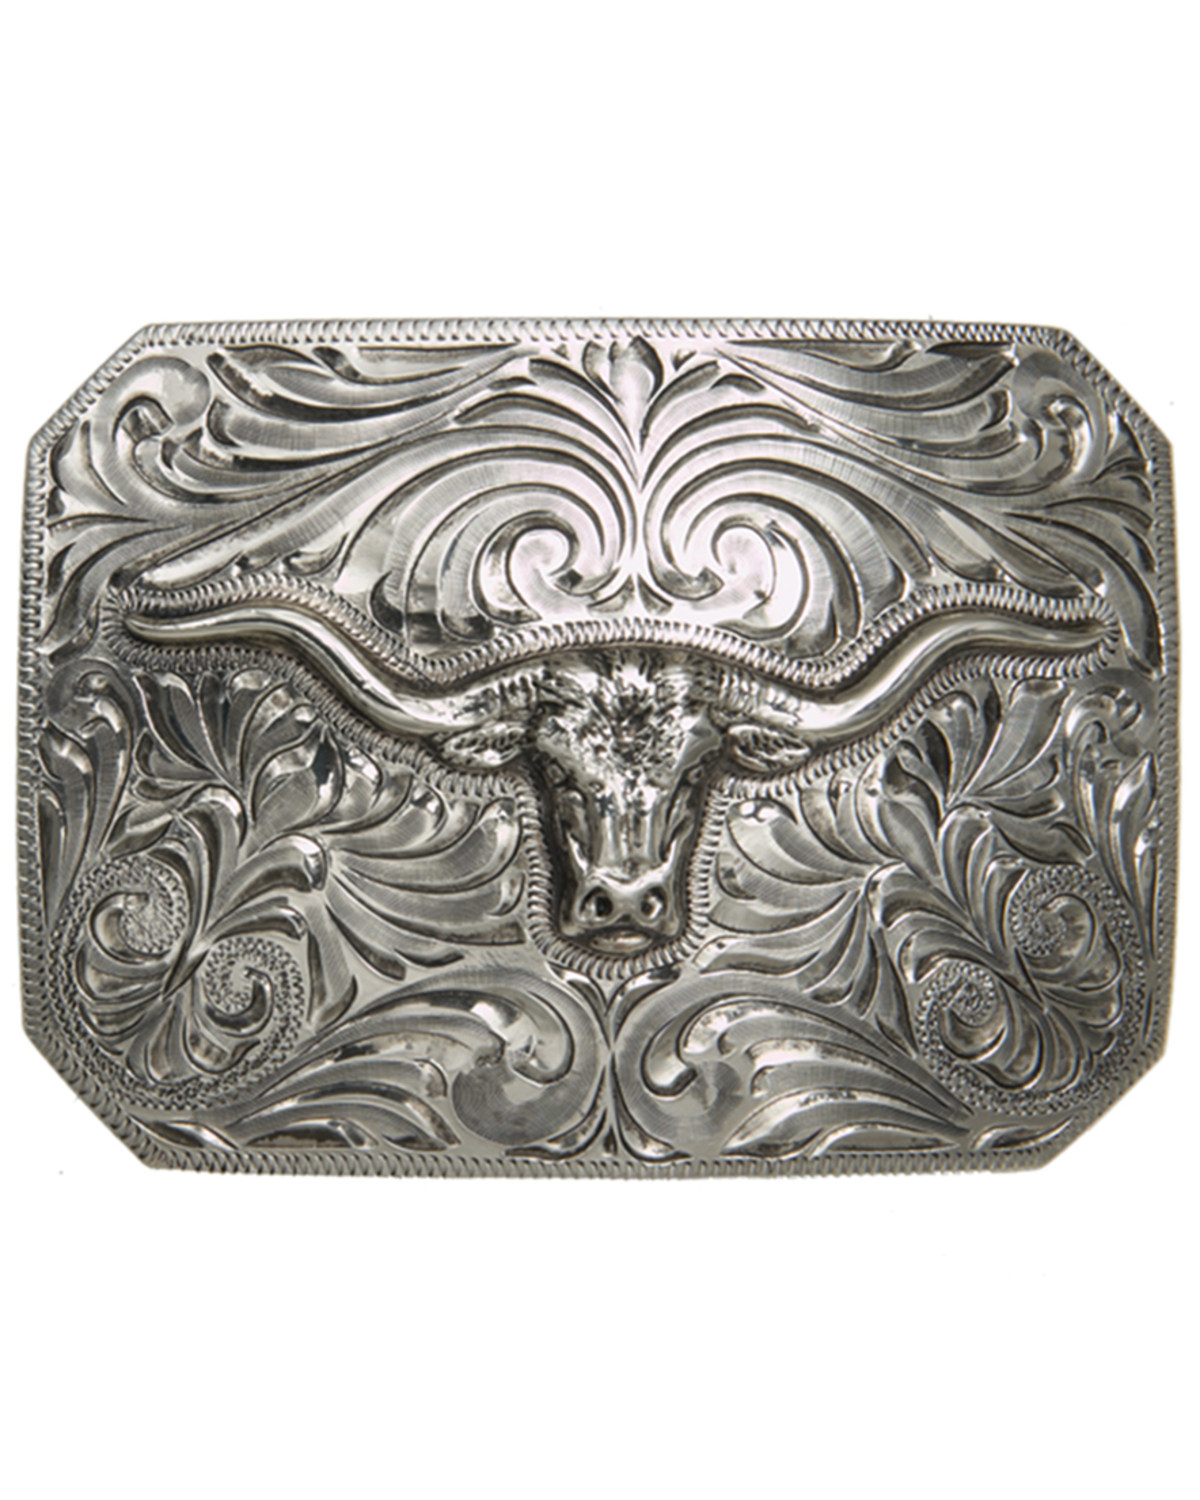 AndWest Antique Silver Longhorn Iconic Buckle